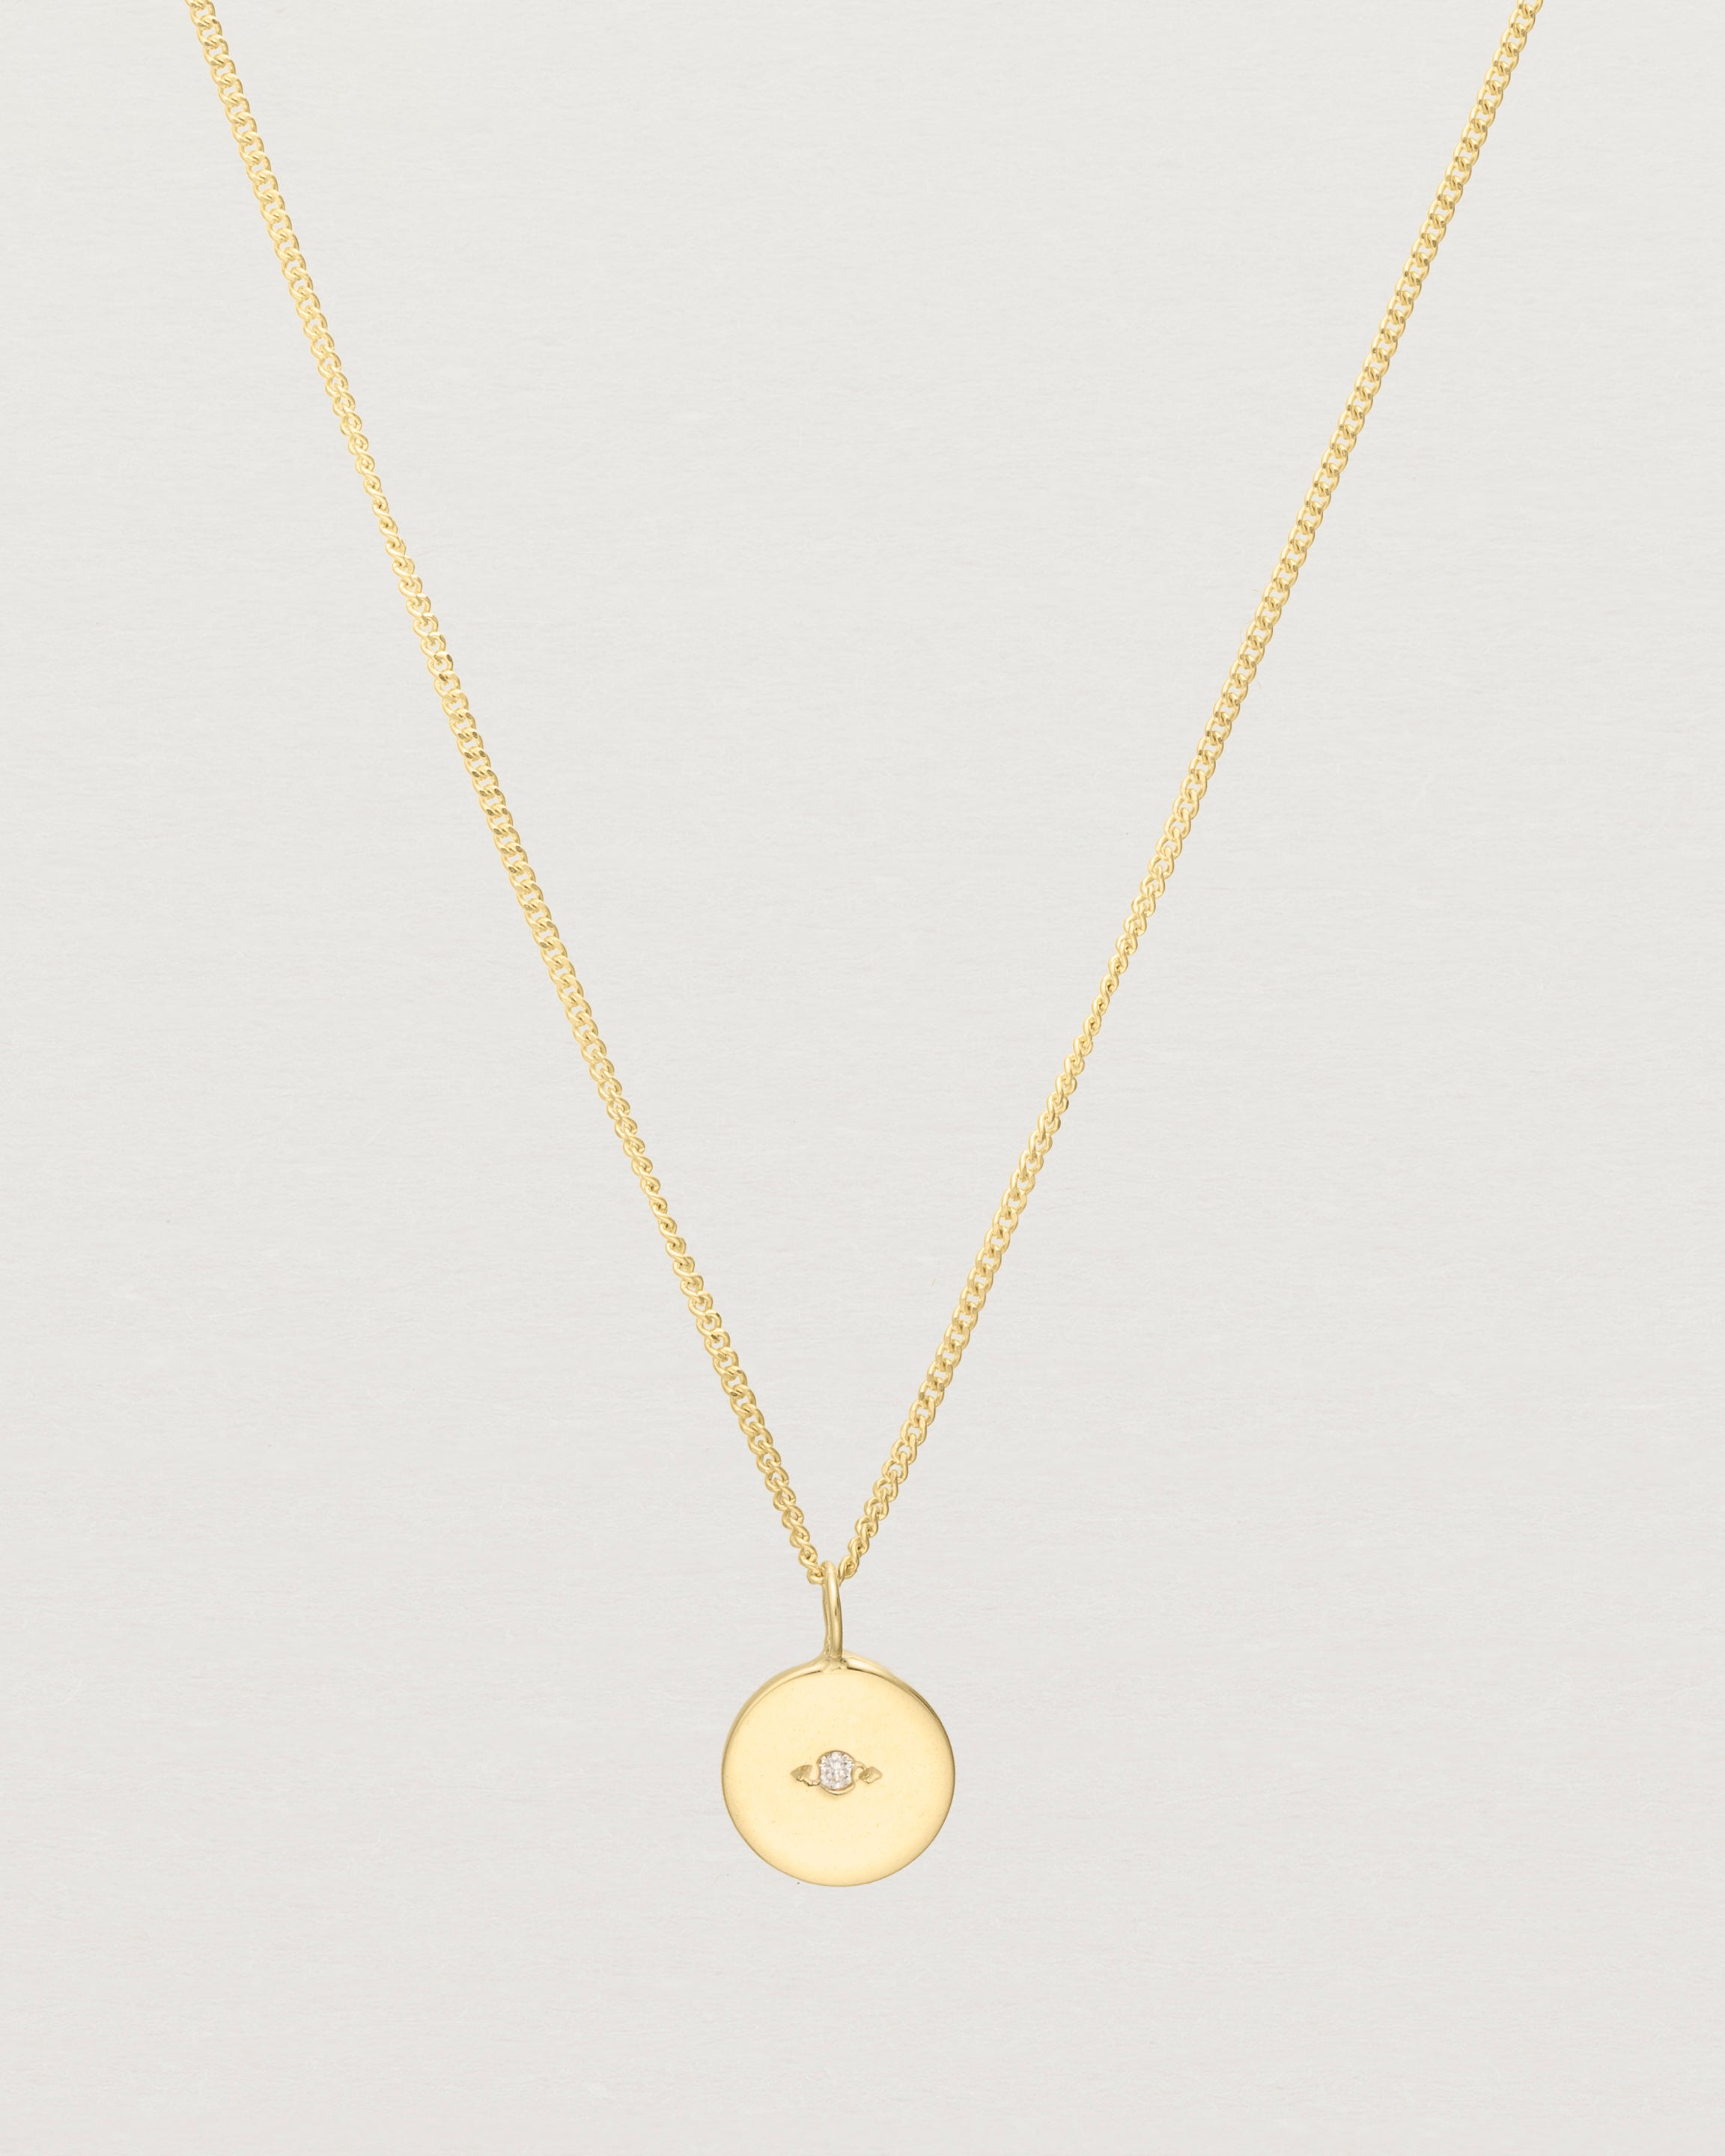 Close up view of the Eily Necklace with a diamond in yellow gold.